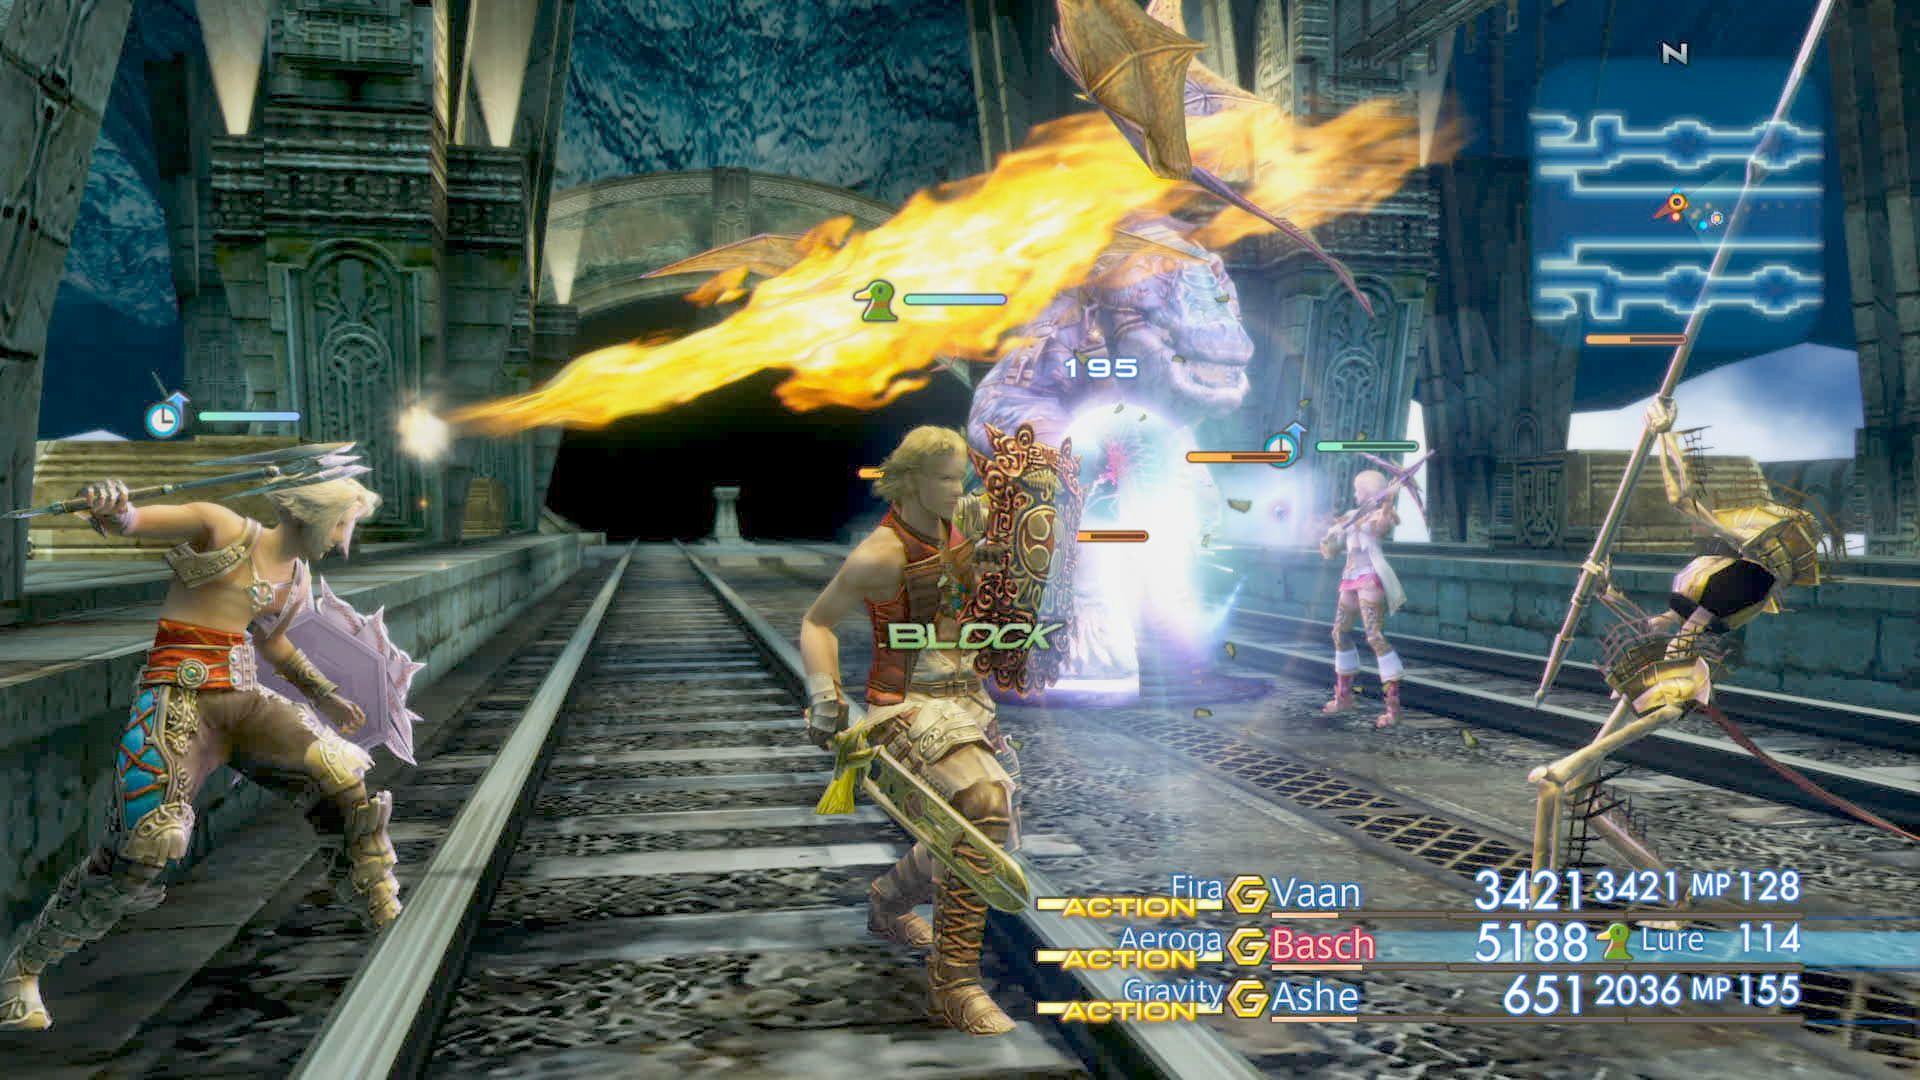 Here's 35 glorious minutes of Final Fantasy XII: The Zodiac Age